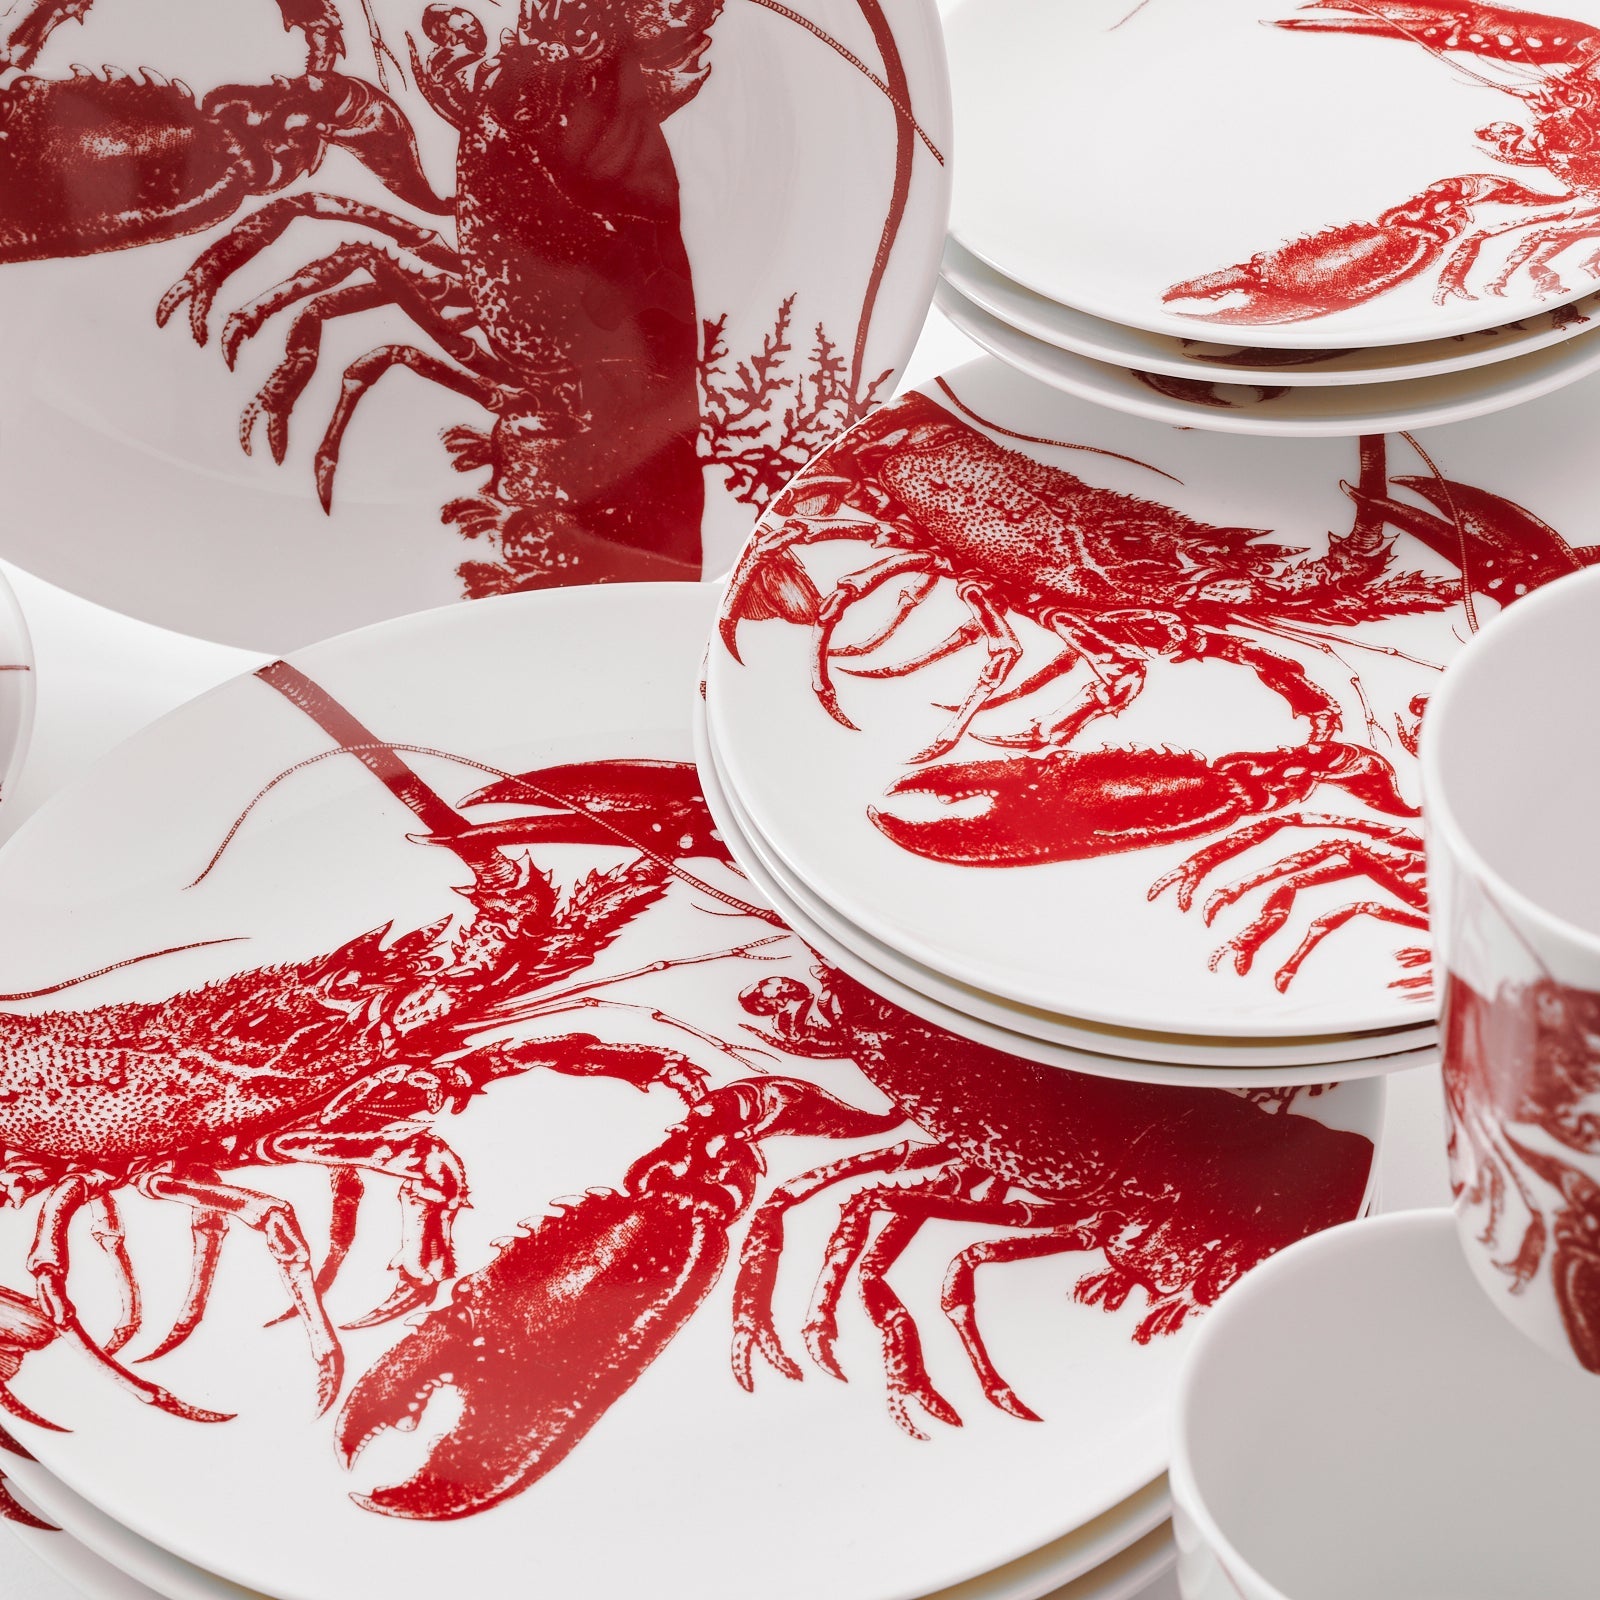 16 piece dinnerware set features large red lobsters on this complete table for 4 from Caskata